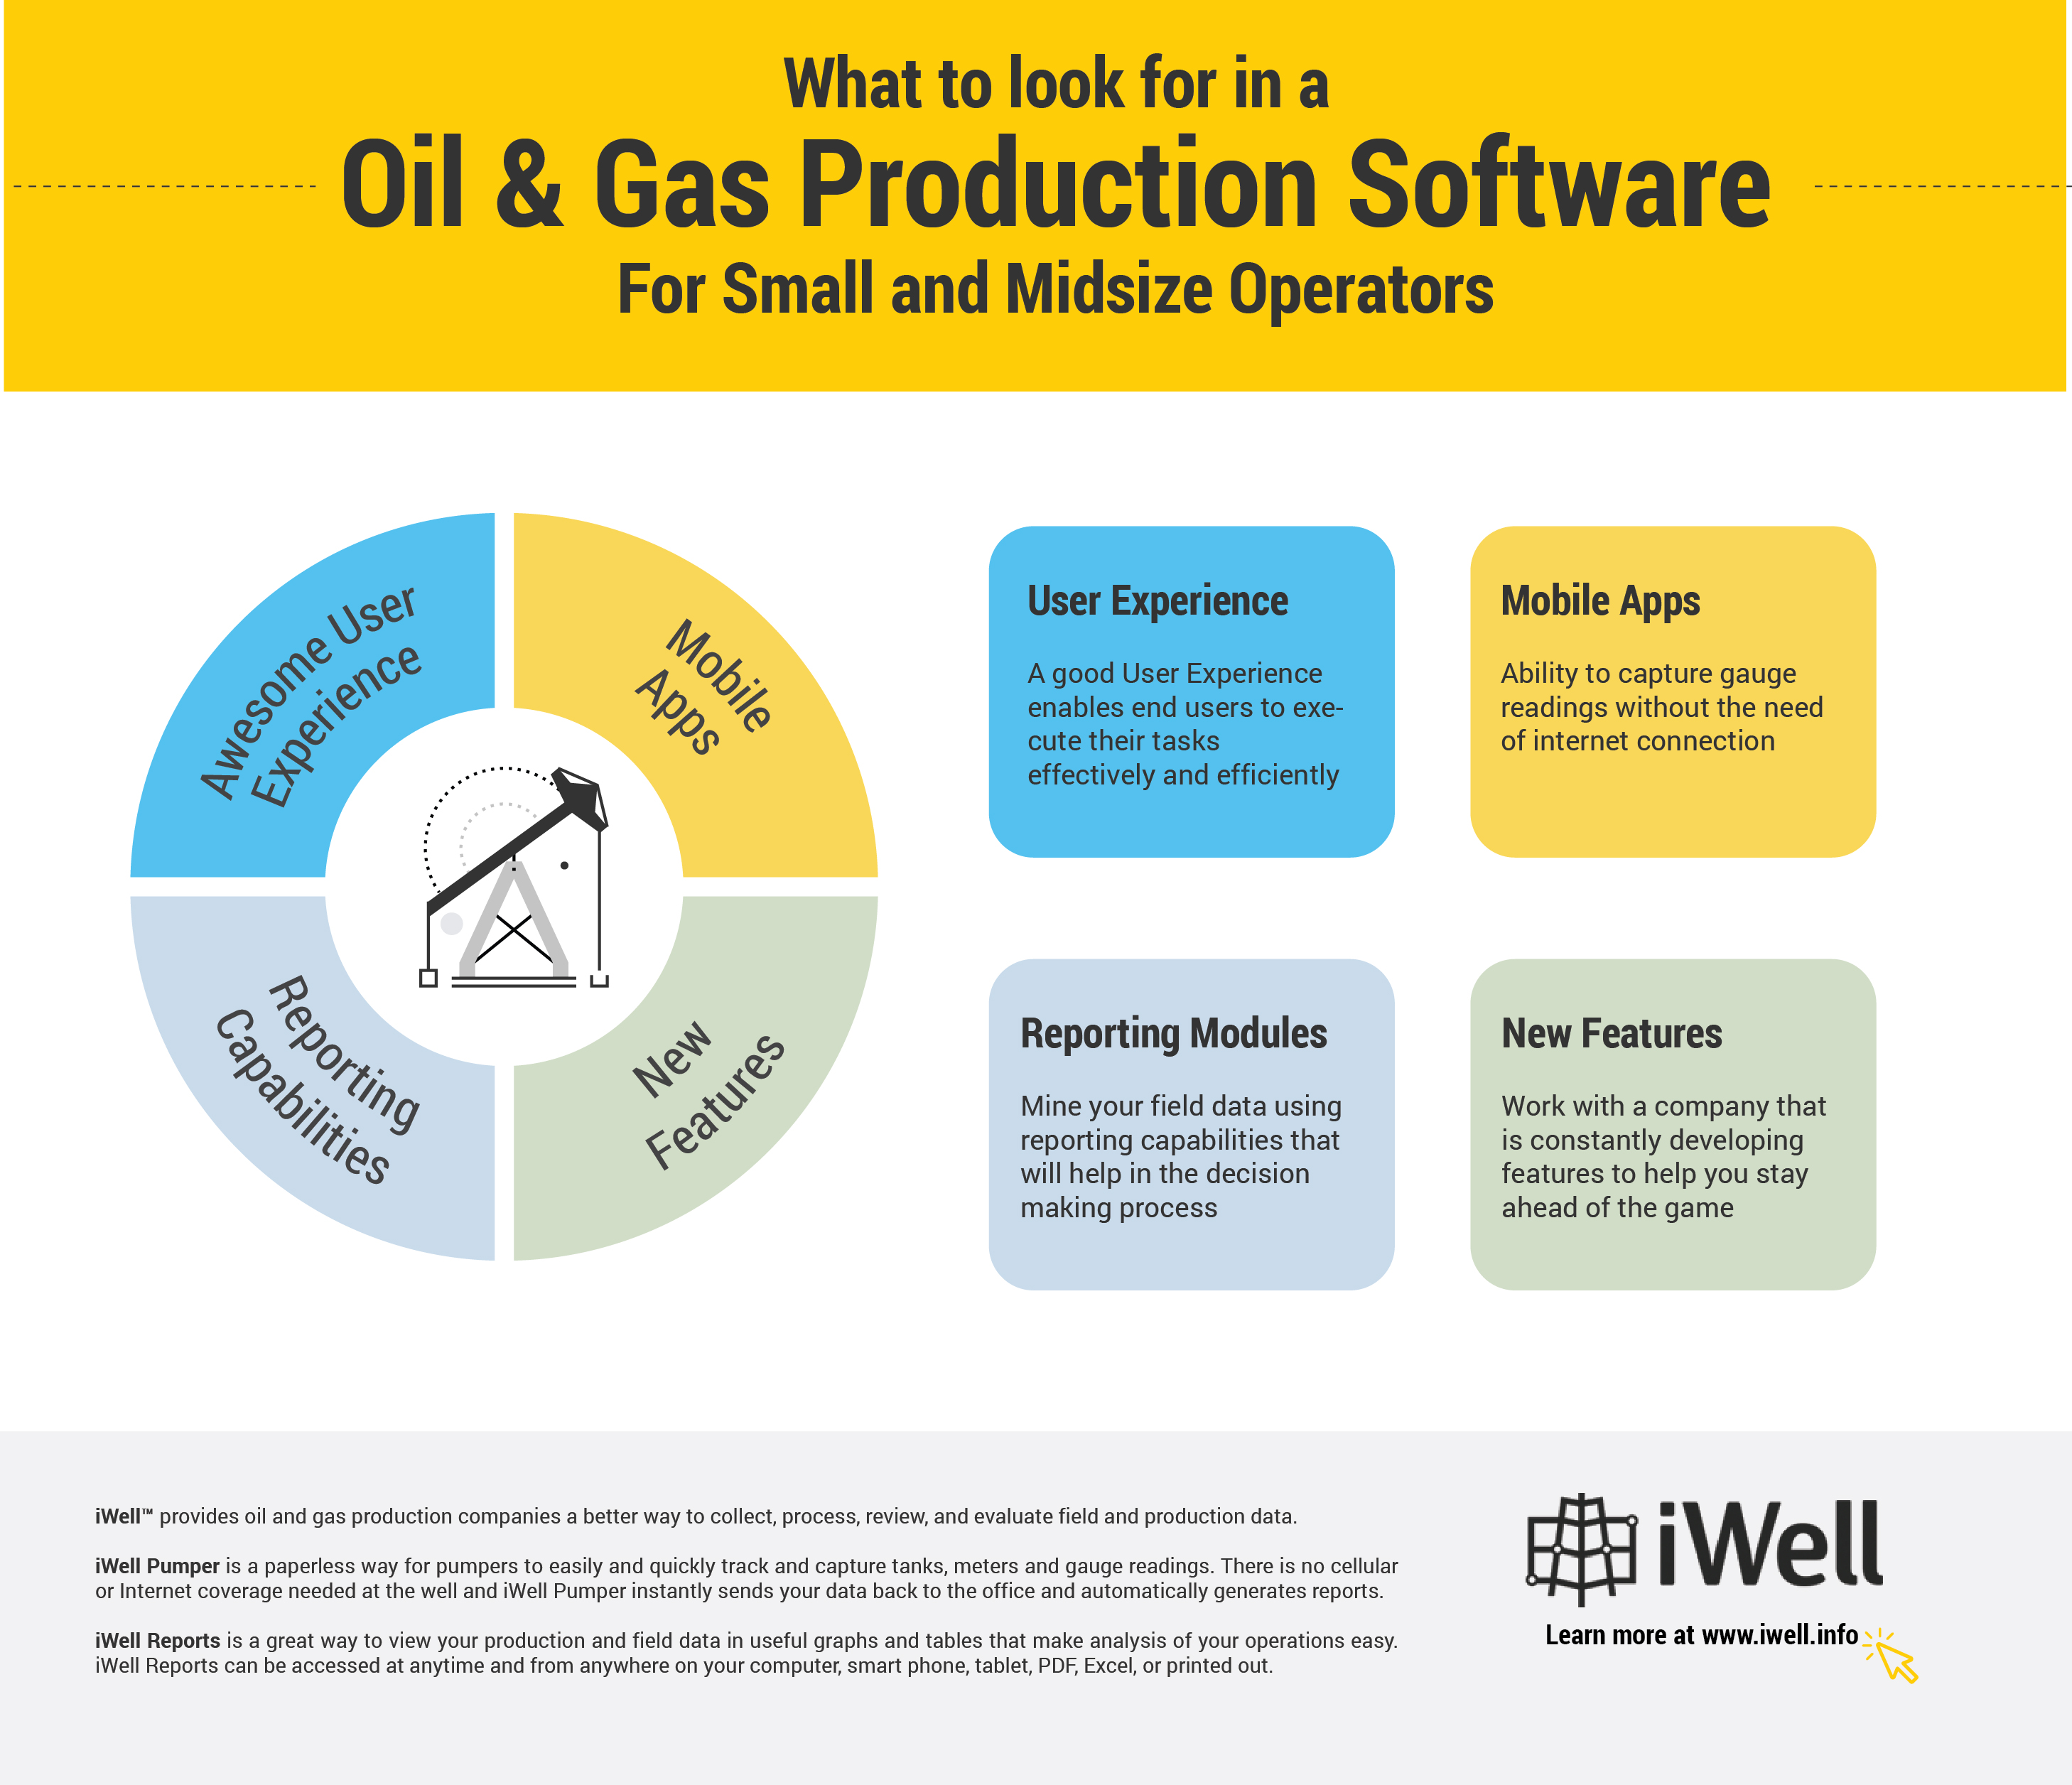 Oil production software